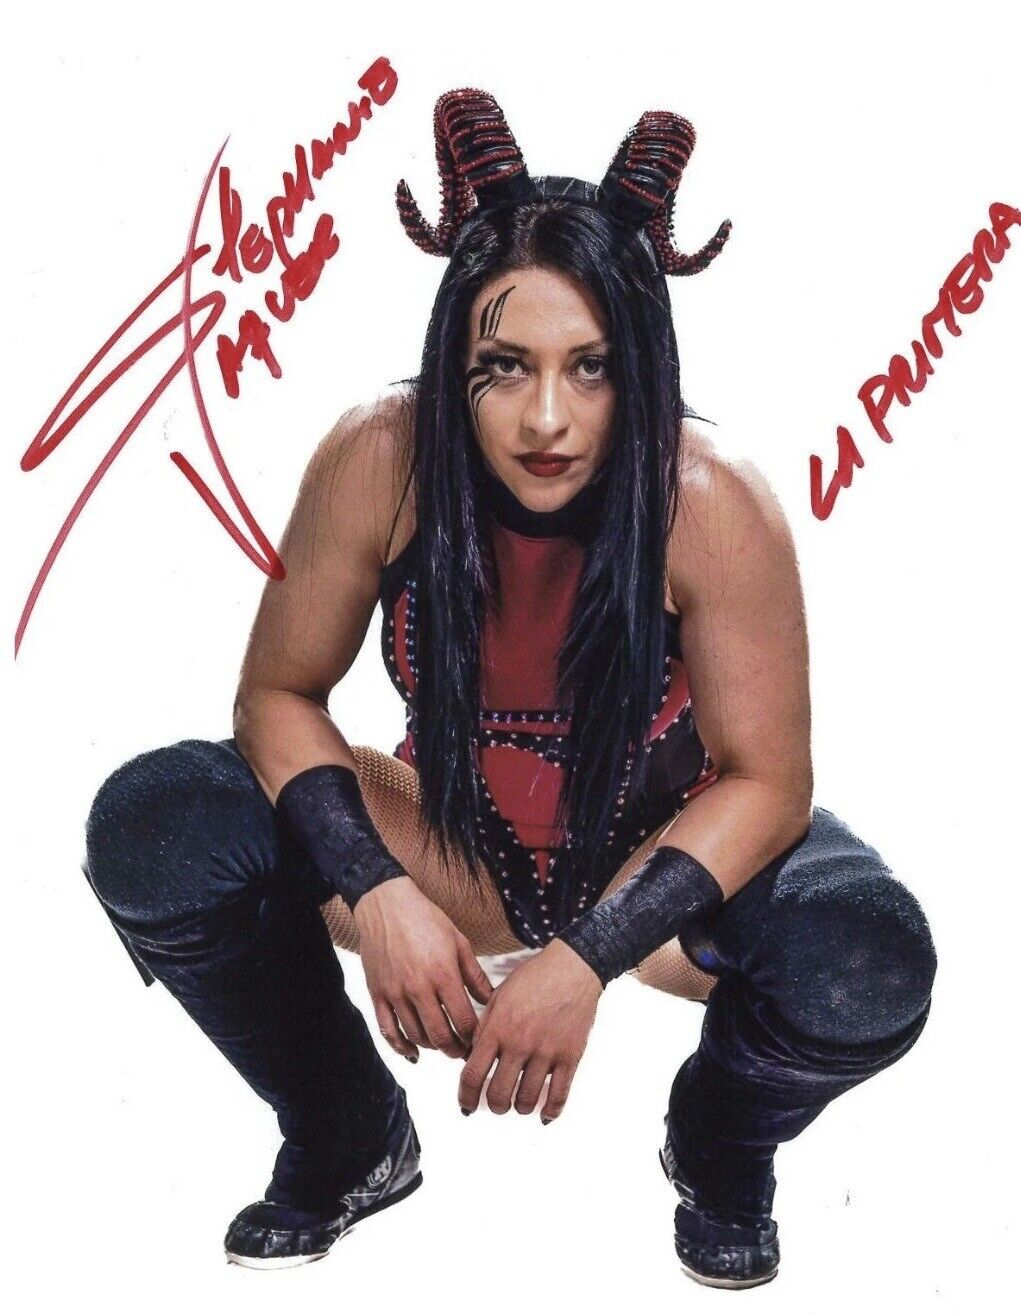 Autographed Stephanie Vaquer 8x10 Photo Hand Signed - Pro Wrestling Pose